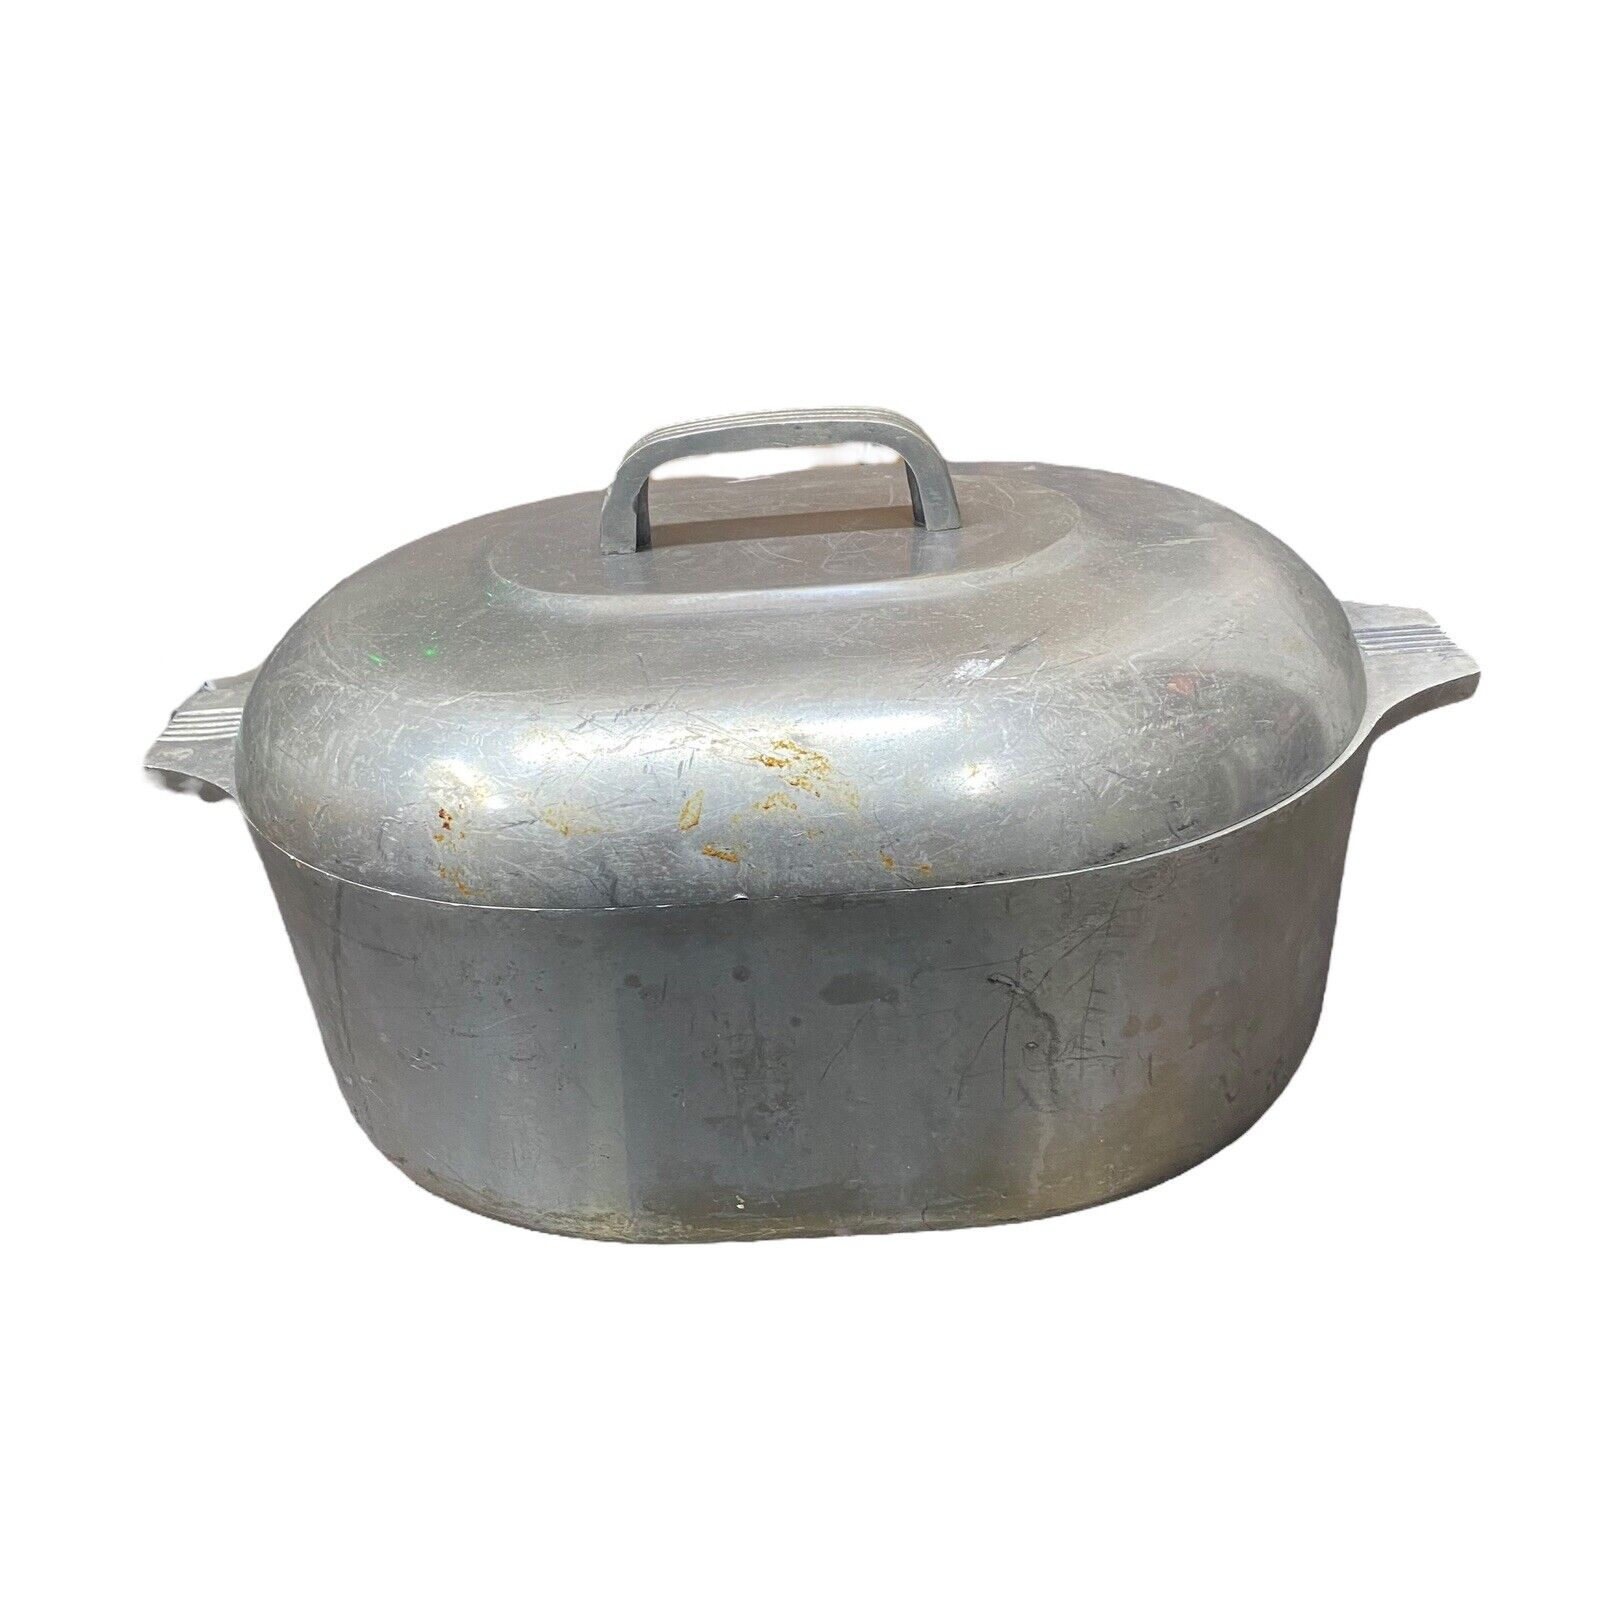 Magnalite GHC 8 Qt Roaster Pot with Lid